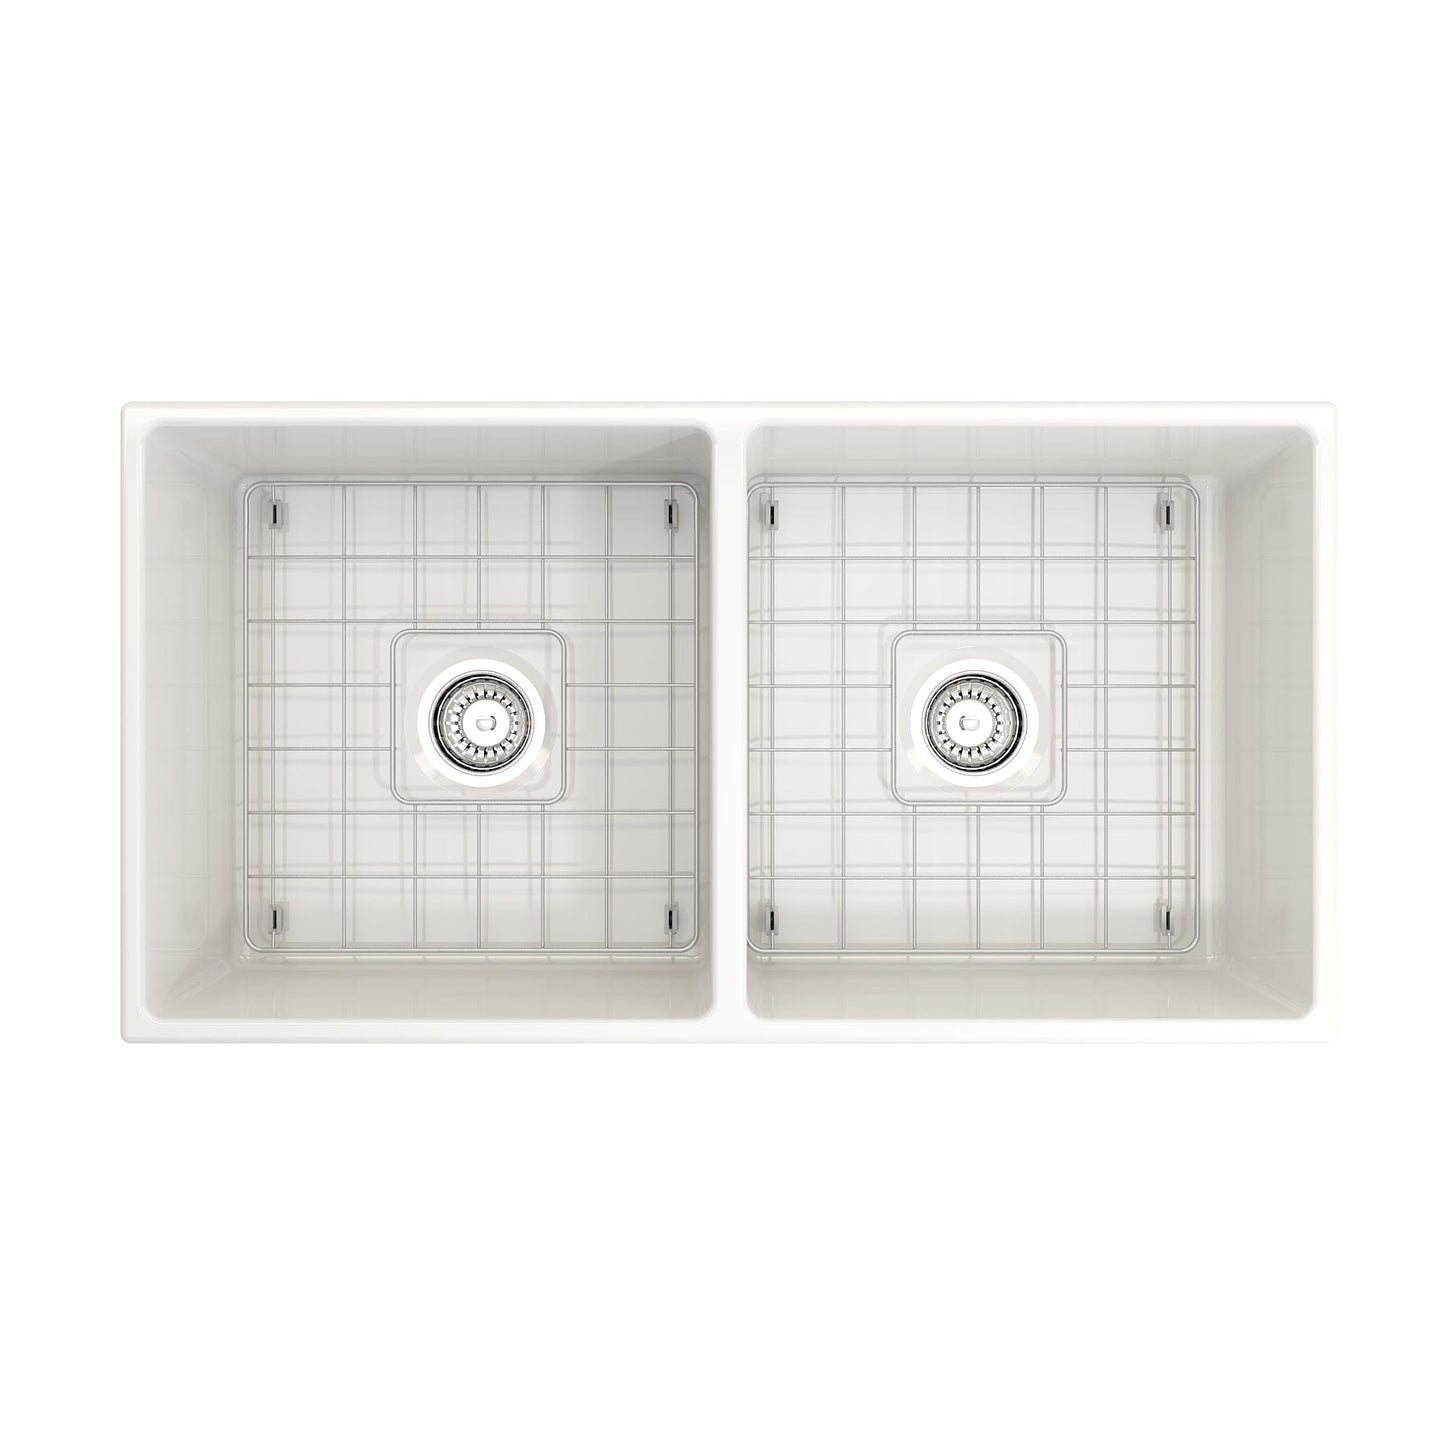 BOCCHI CONTEMPO 36" Fireclay Farmhouse Double Bowl Kitchen Sink with Protective Bottom Grid and Strainer, WHITE - 1350-001-0120 - Manor House Sinks